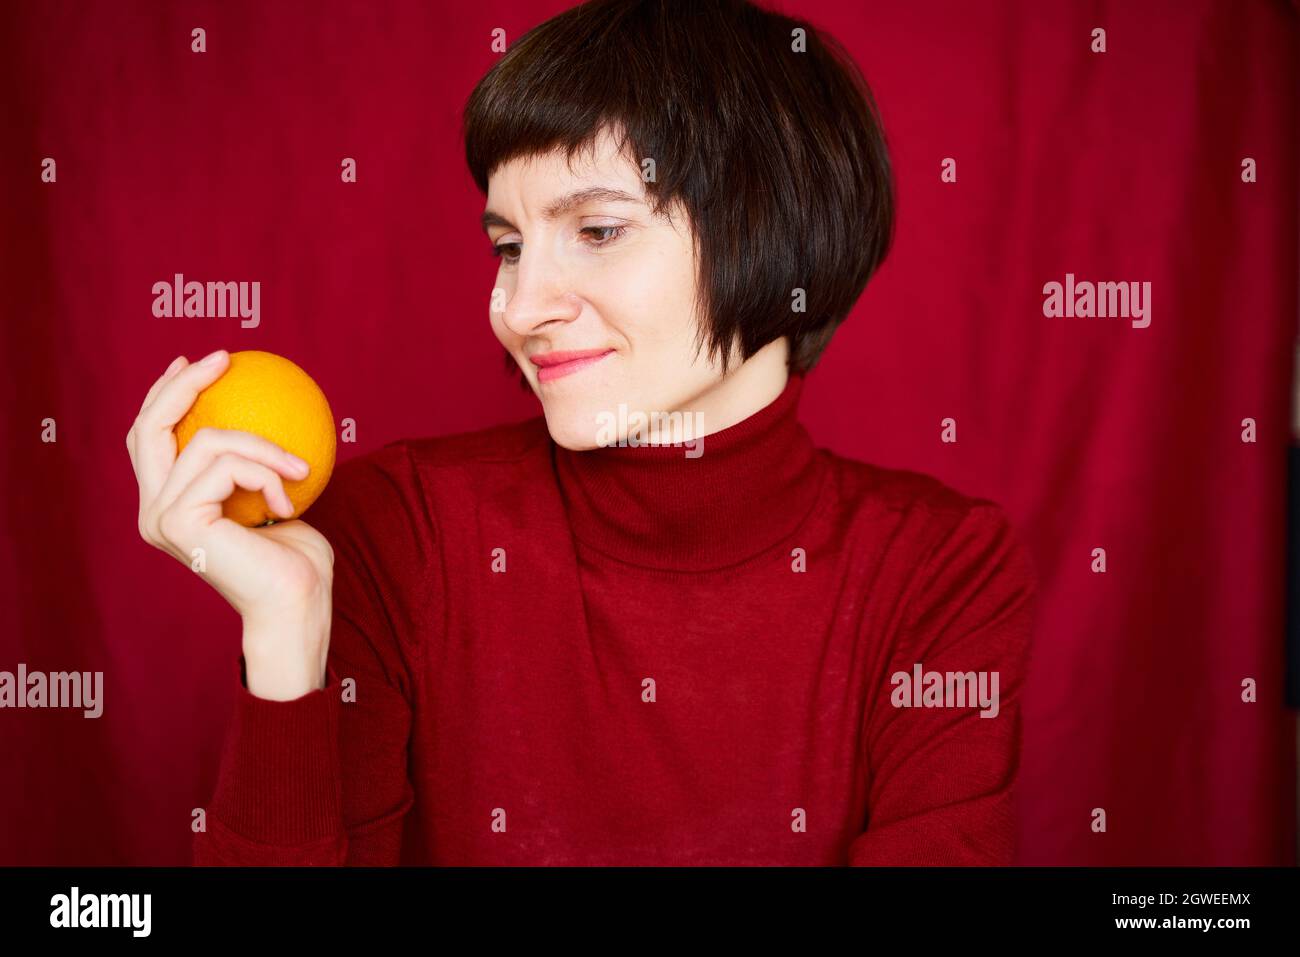 Smiling Mature Brunette Woman Looking At Orange Fruit In Hand, Close-up Face Portrait. Generation X, Stock Photo